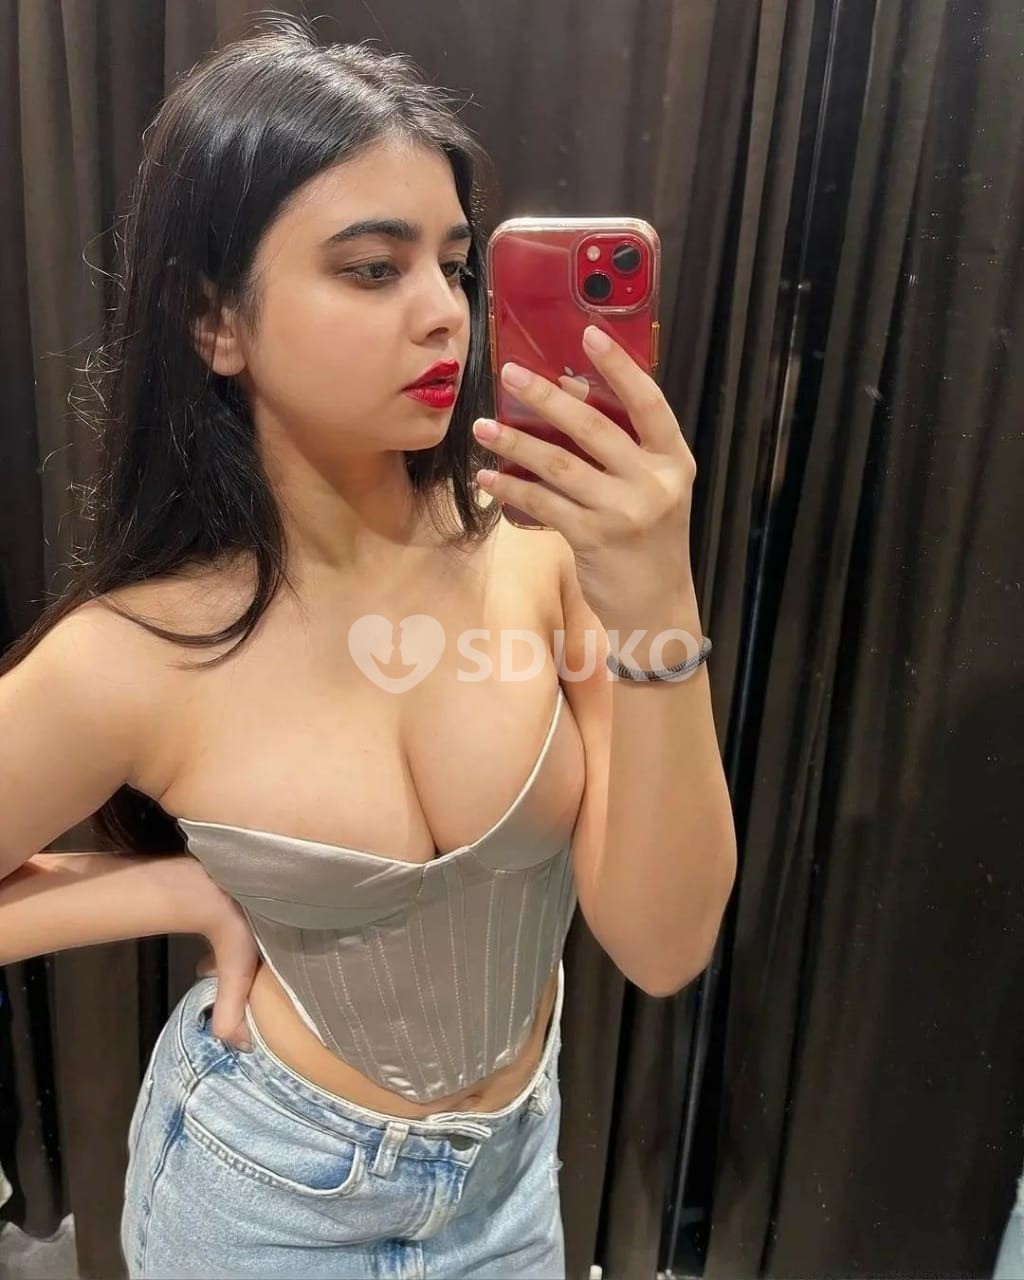 MALAD VIP TODAY LOW PRICE ;-ESCORT 🥰SERVICE 100% SAFE AND SECURE ANYTIME CALL ME 24 X 7 SERVICE AVAILABLE 100% SAFE